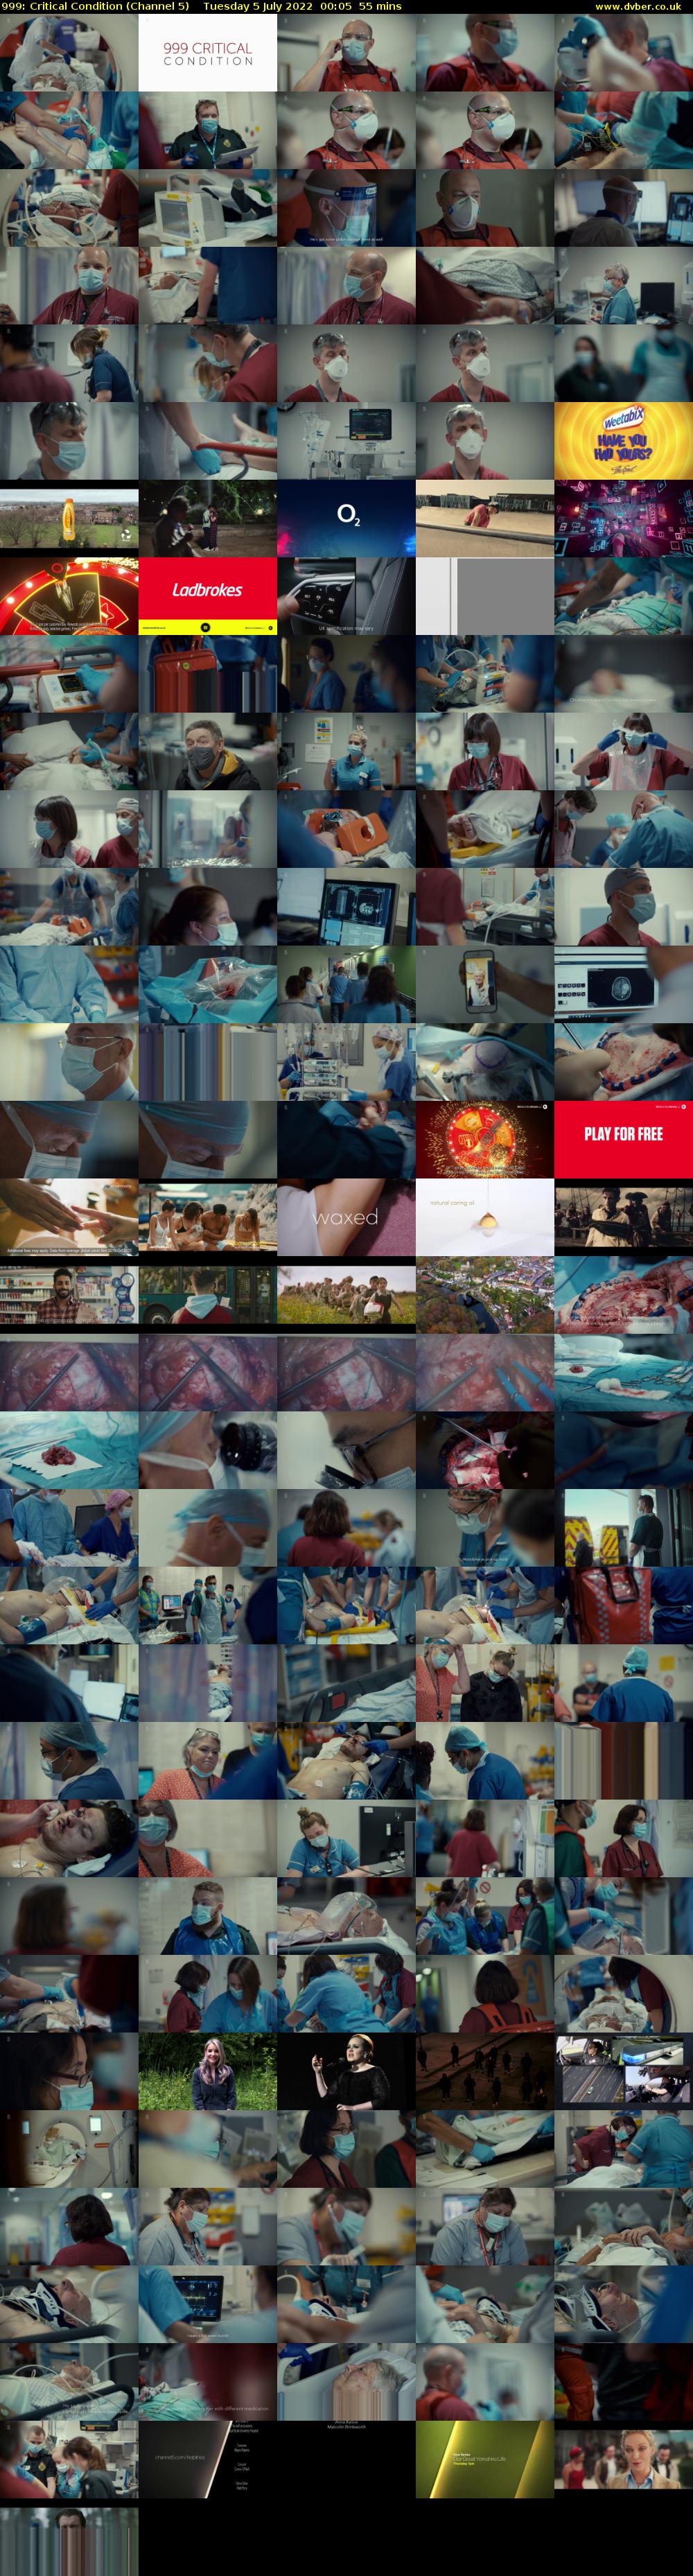 999: Critical Condition (Channel 5) Tuesday 5 July 2022 00:05 - 01:00